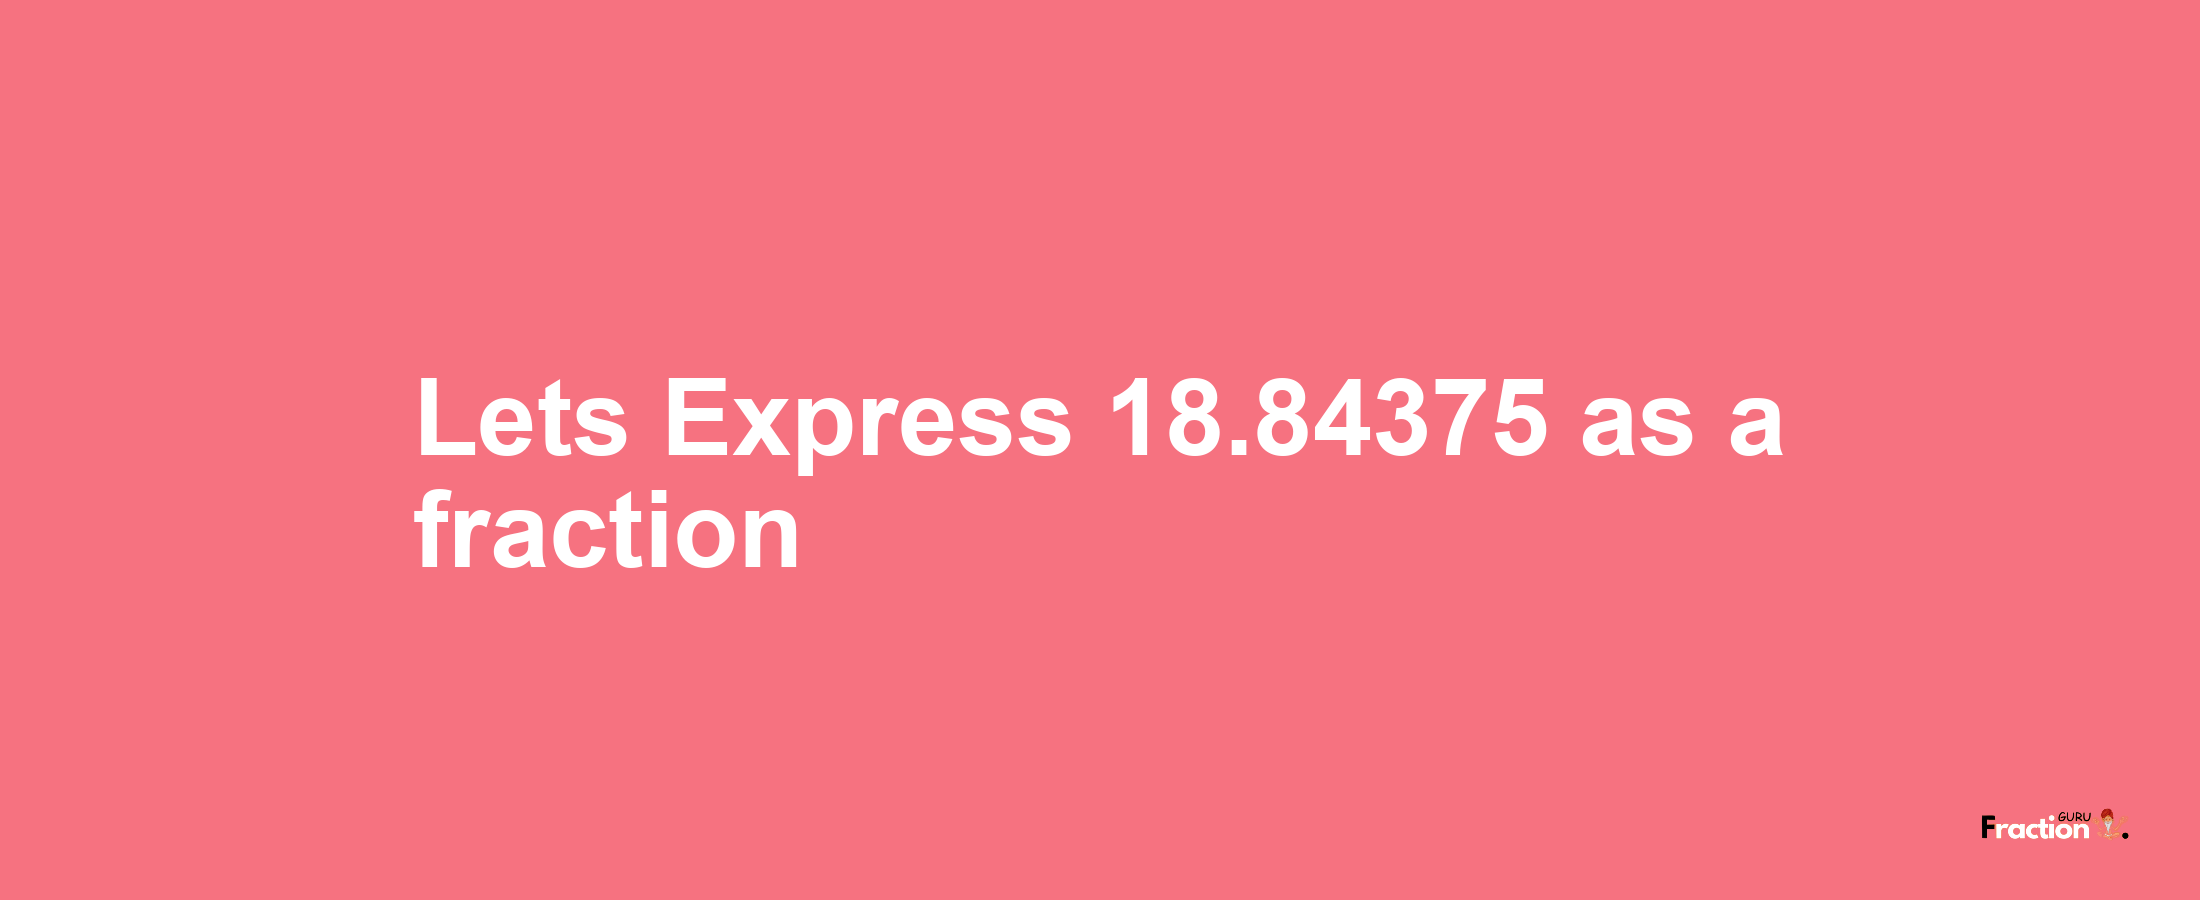 Lets Express 18.84375 as afraction